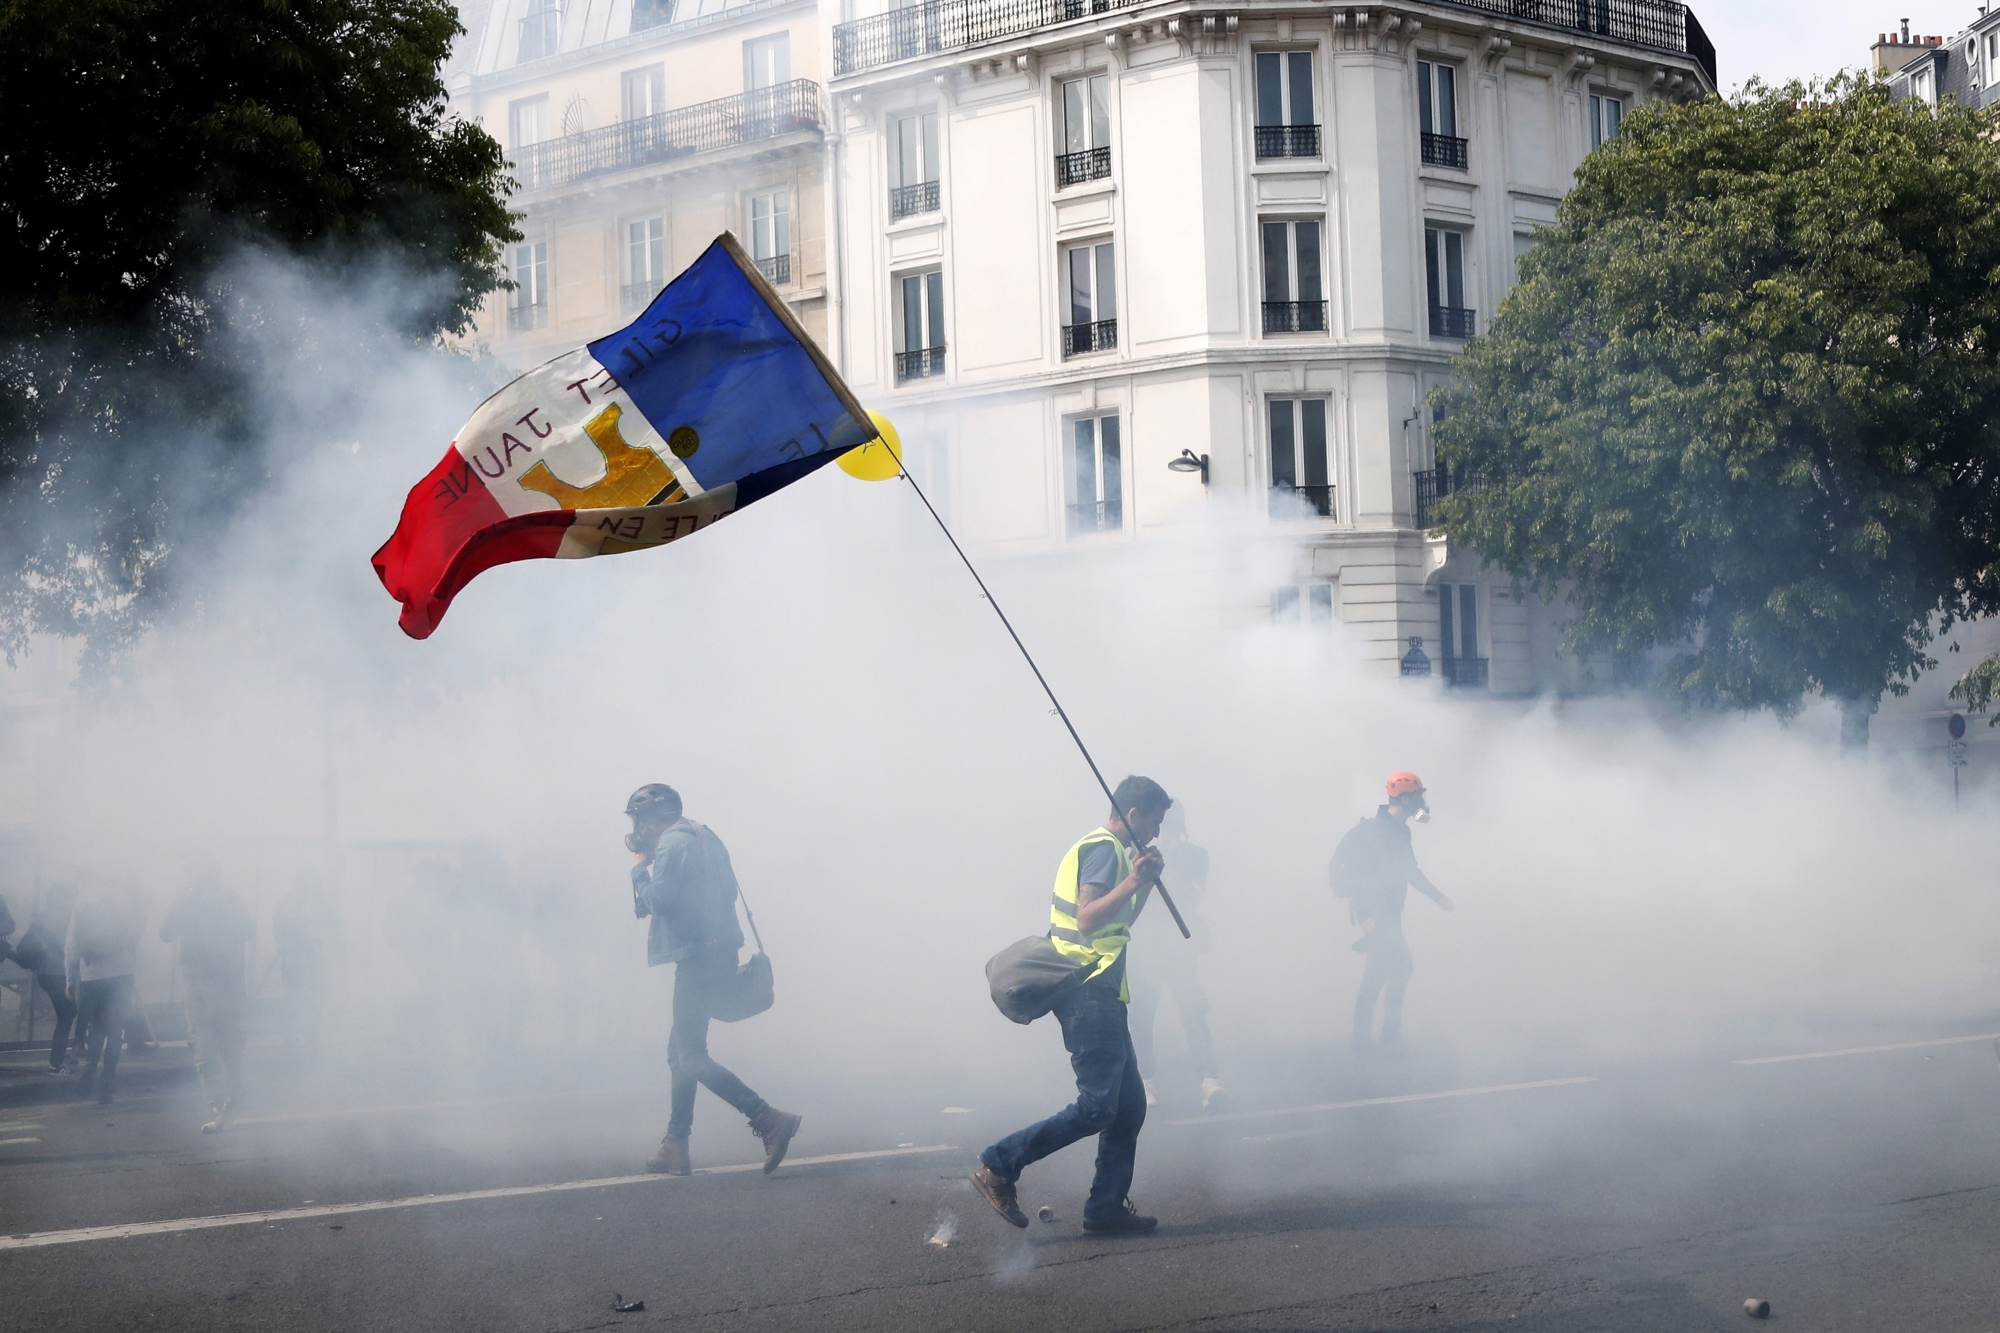 epa07540340 A 'Gilets Jaunes' (Yellow Vests) protester holds a French flag during a demonstration of the French trade unions members and the 'Gilets Jaunes' (Yellow Vests) movement marking Labor Day in Paris, France, 01 May 2019.  EPA/IAN LANGSDON FRANCE LABOR DAY PROTEST